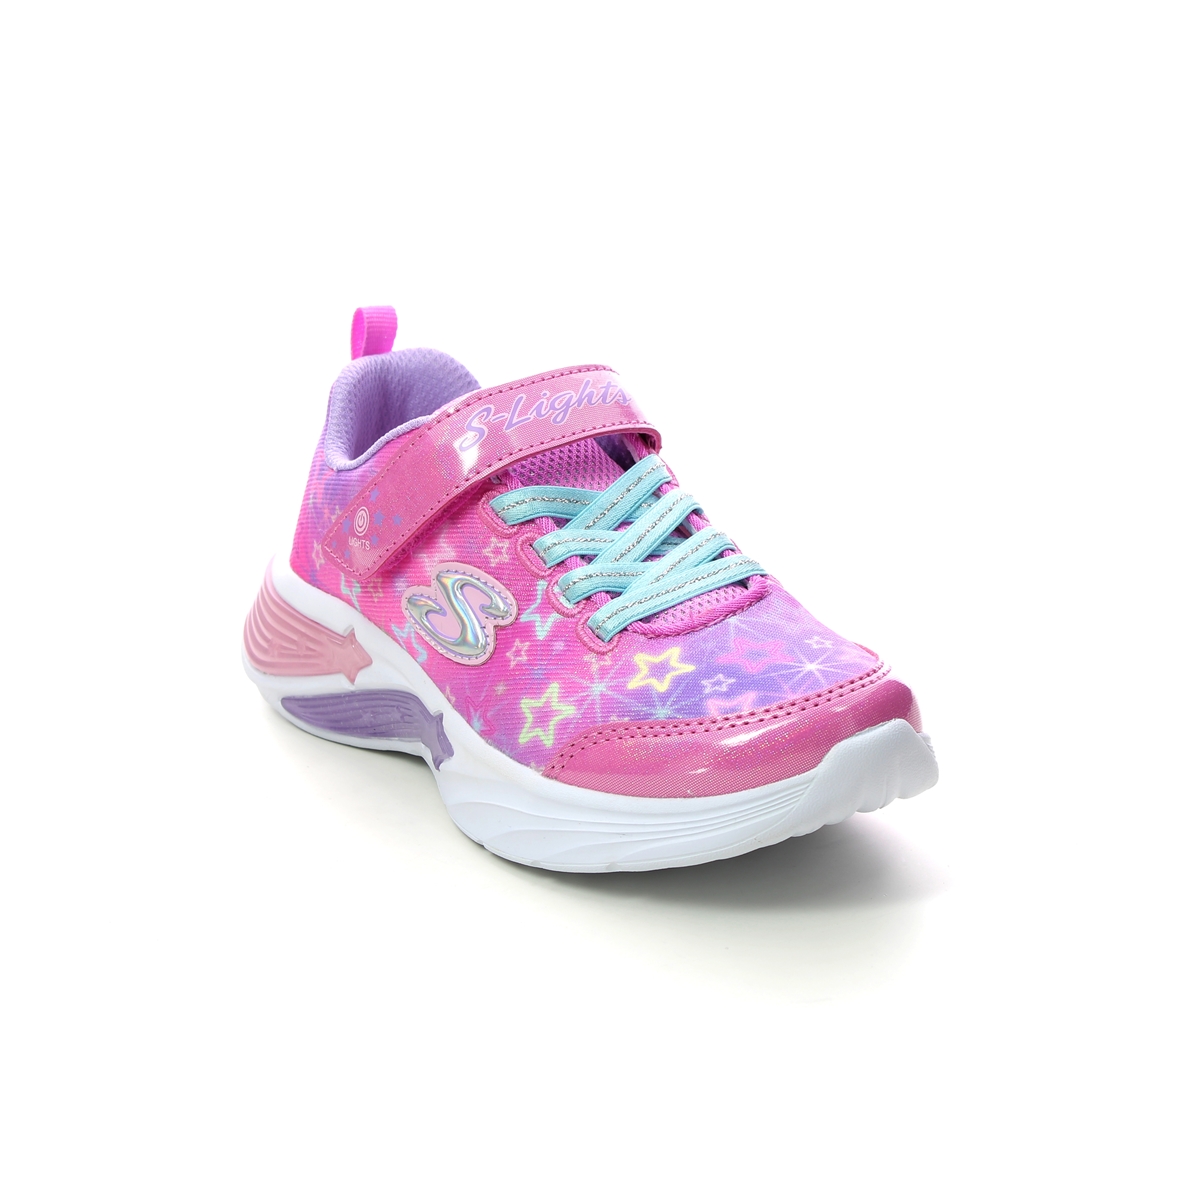 Skechers Star Sparks Pink Kids Girls Trainers 302324L In Size 32 In Plain Pink For kids